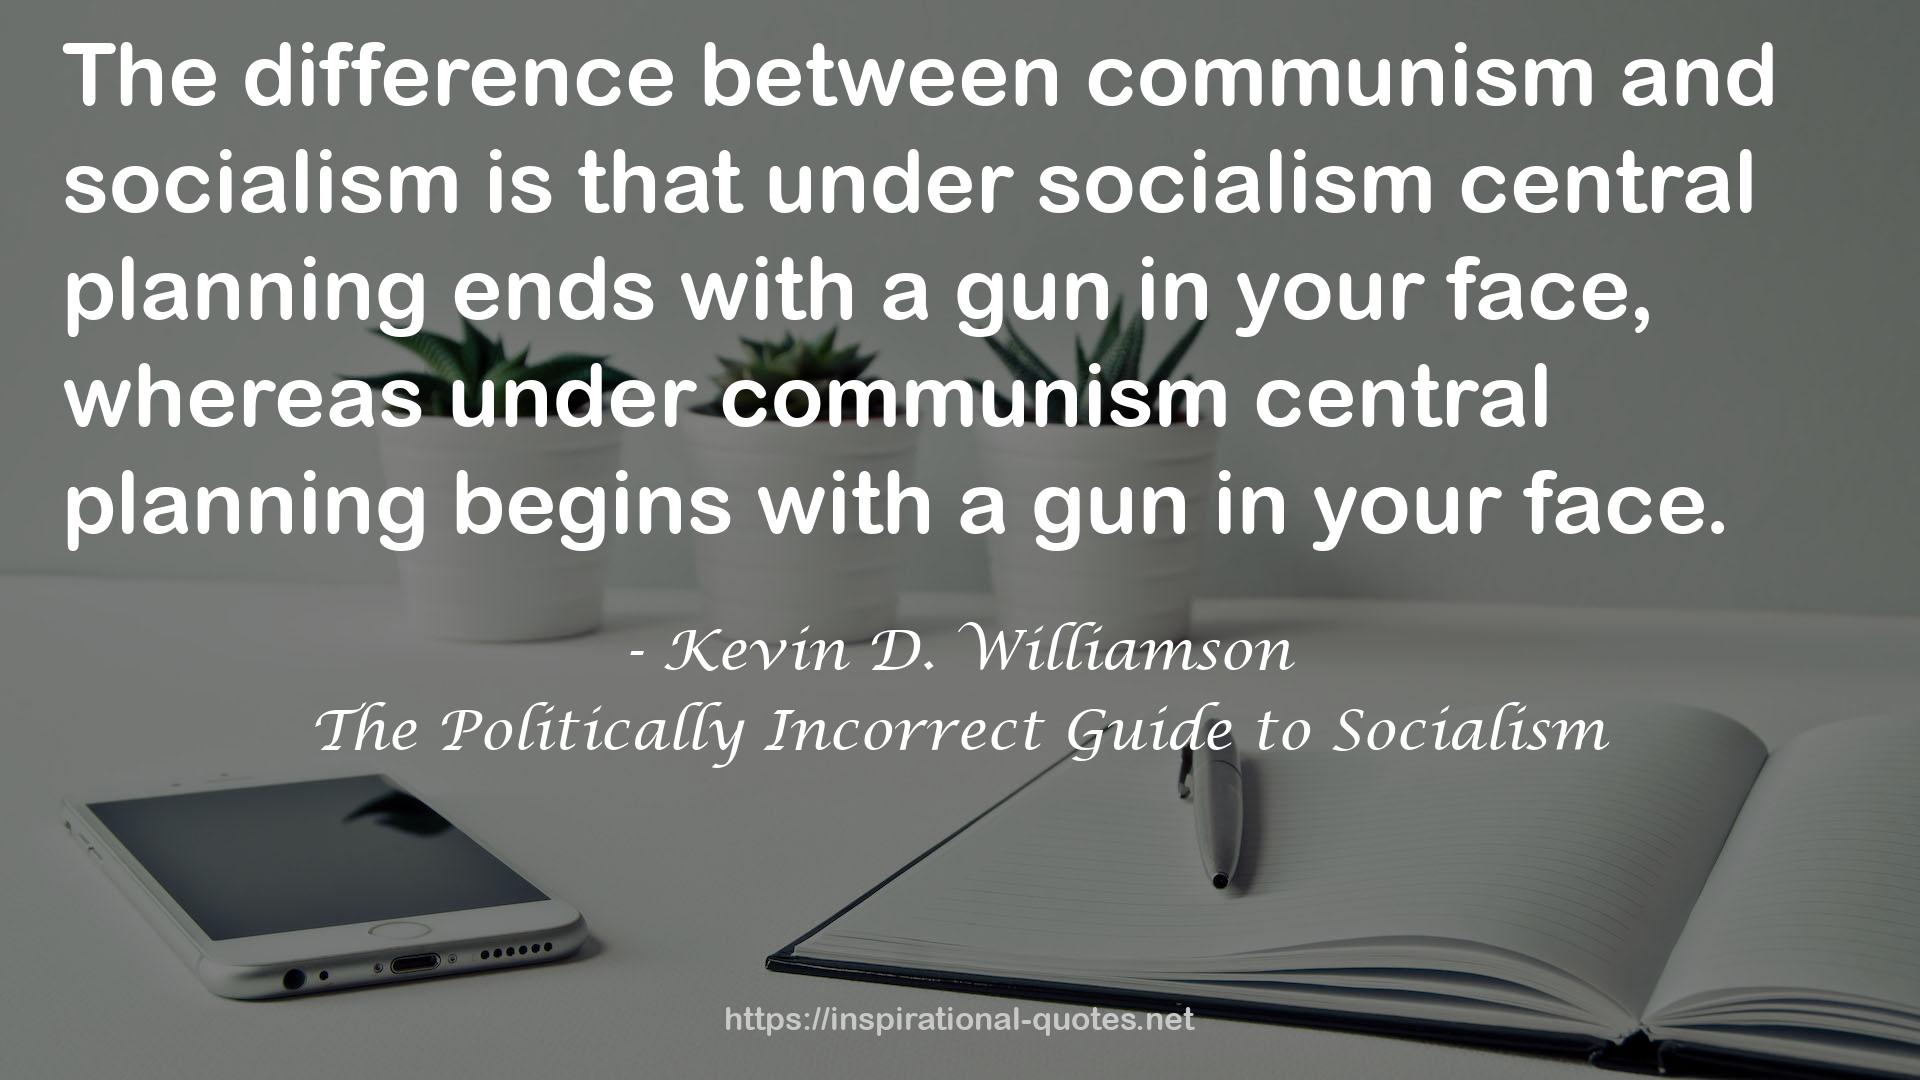 The Politically Incorrect Guide to Socialism QUOTES